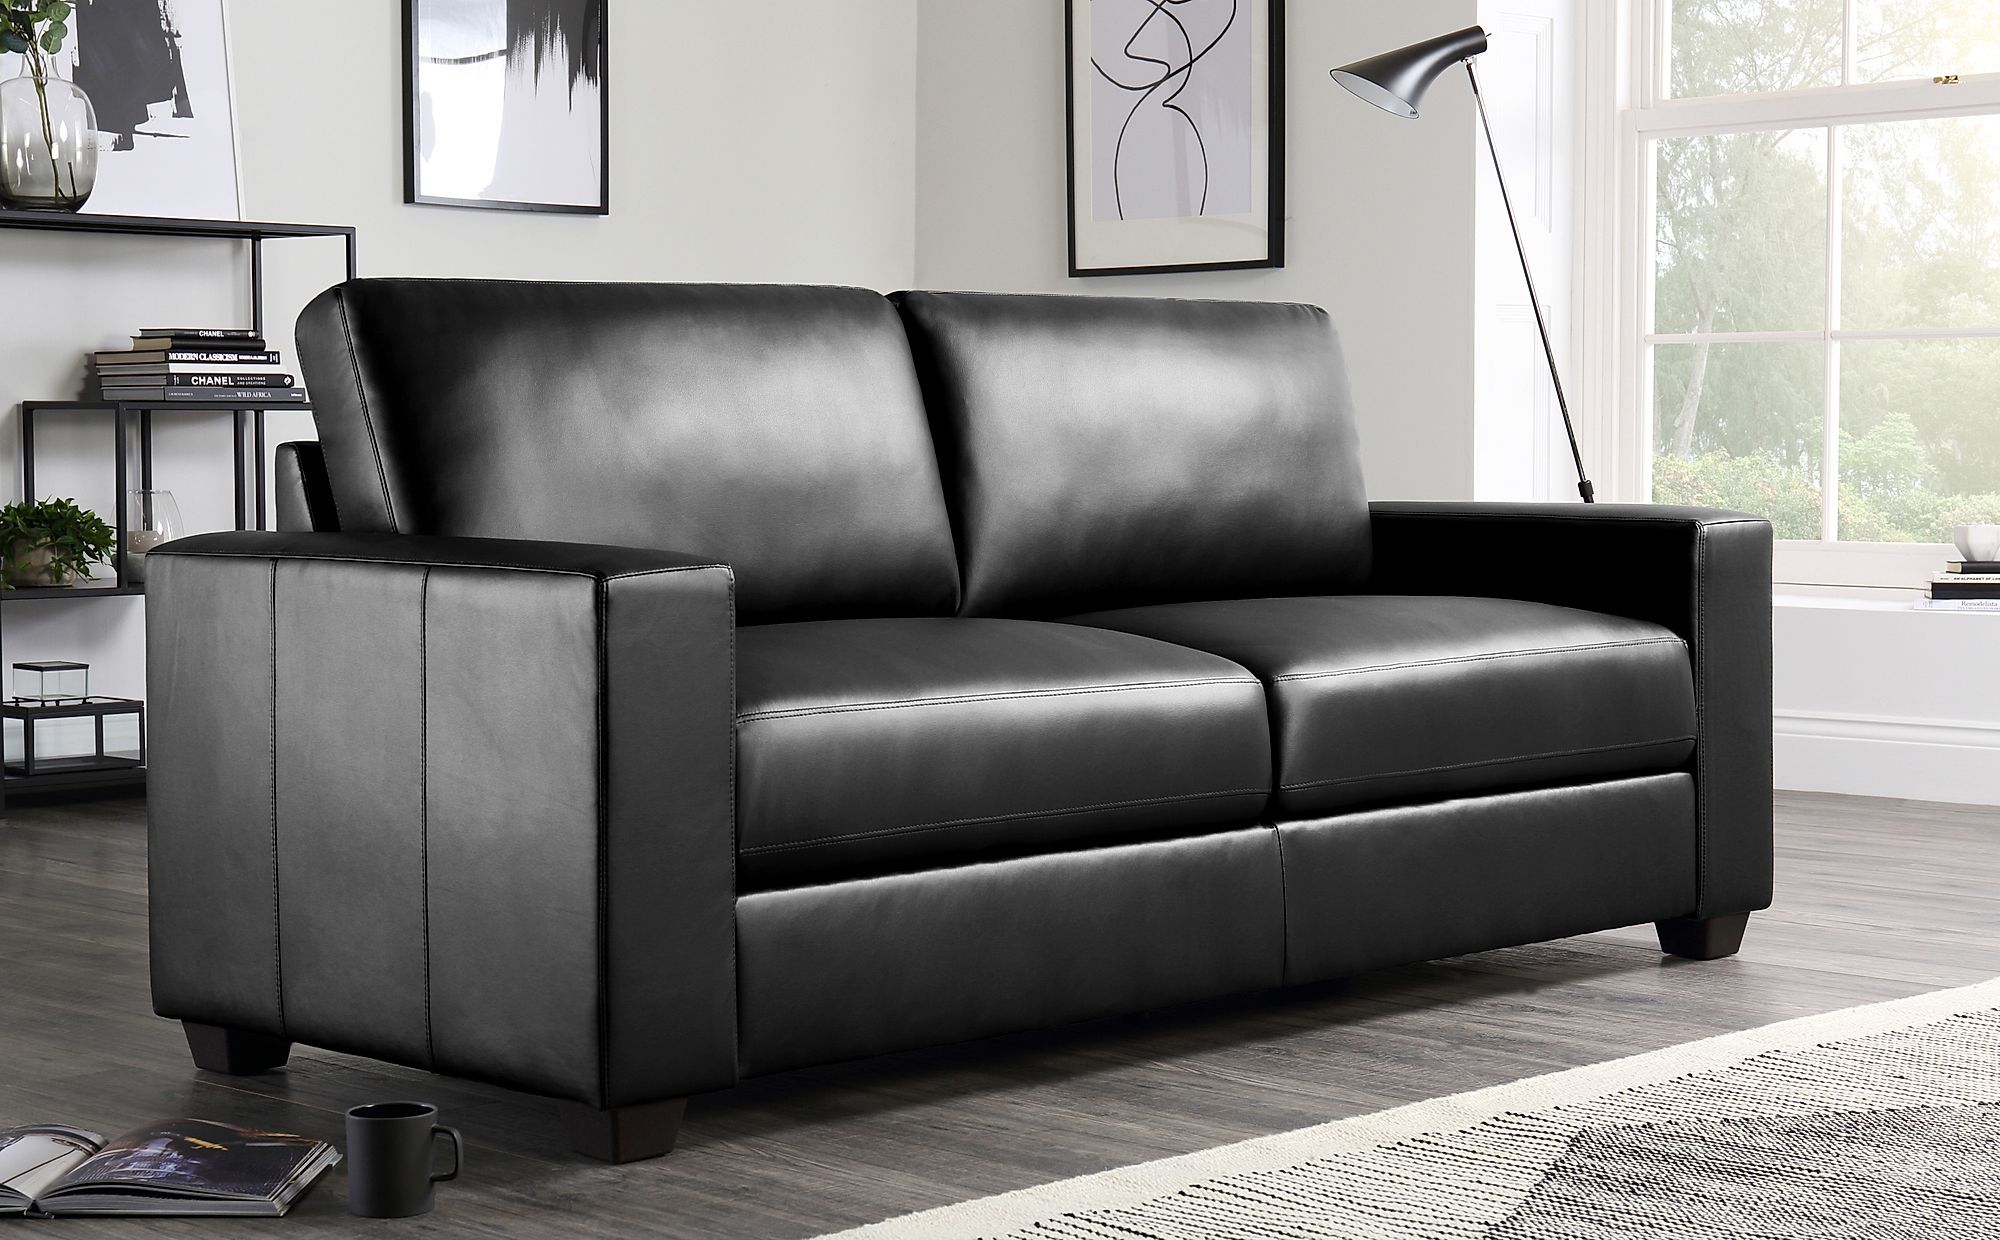 Mission Black Leather 3 Seater Sofa | Furniture Choice Inside 3 Seat L Shaped Sofas In Black (View 10 of 20)